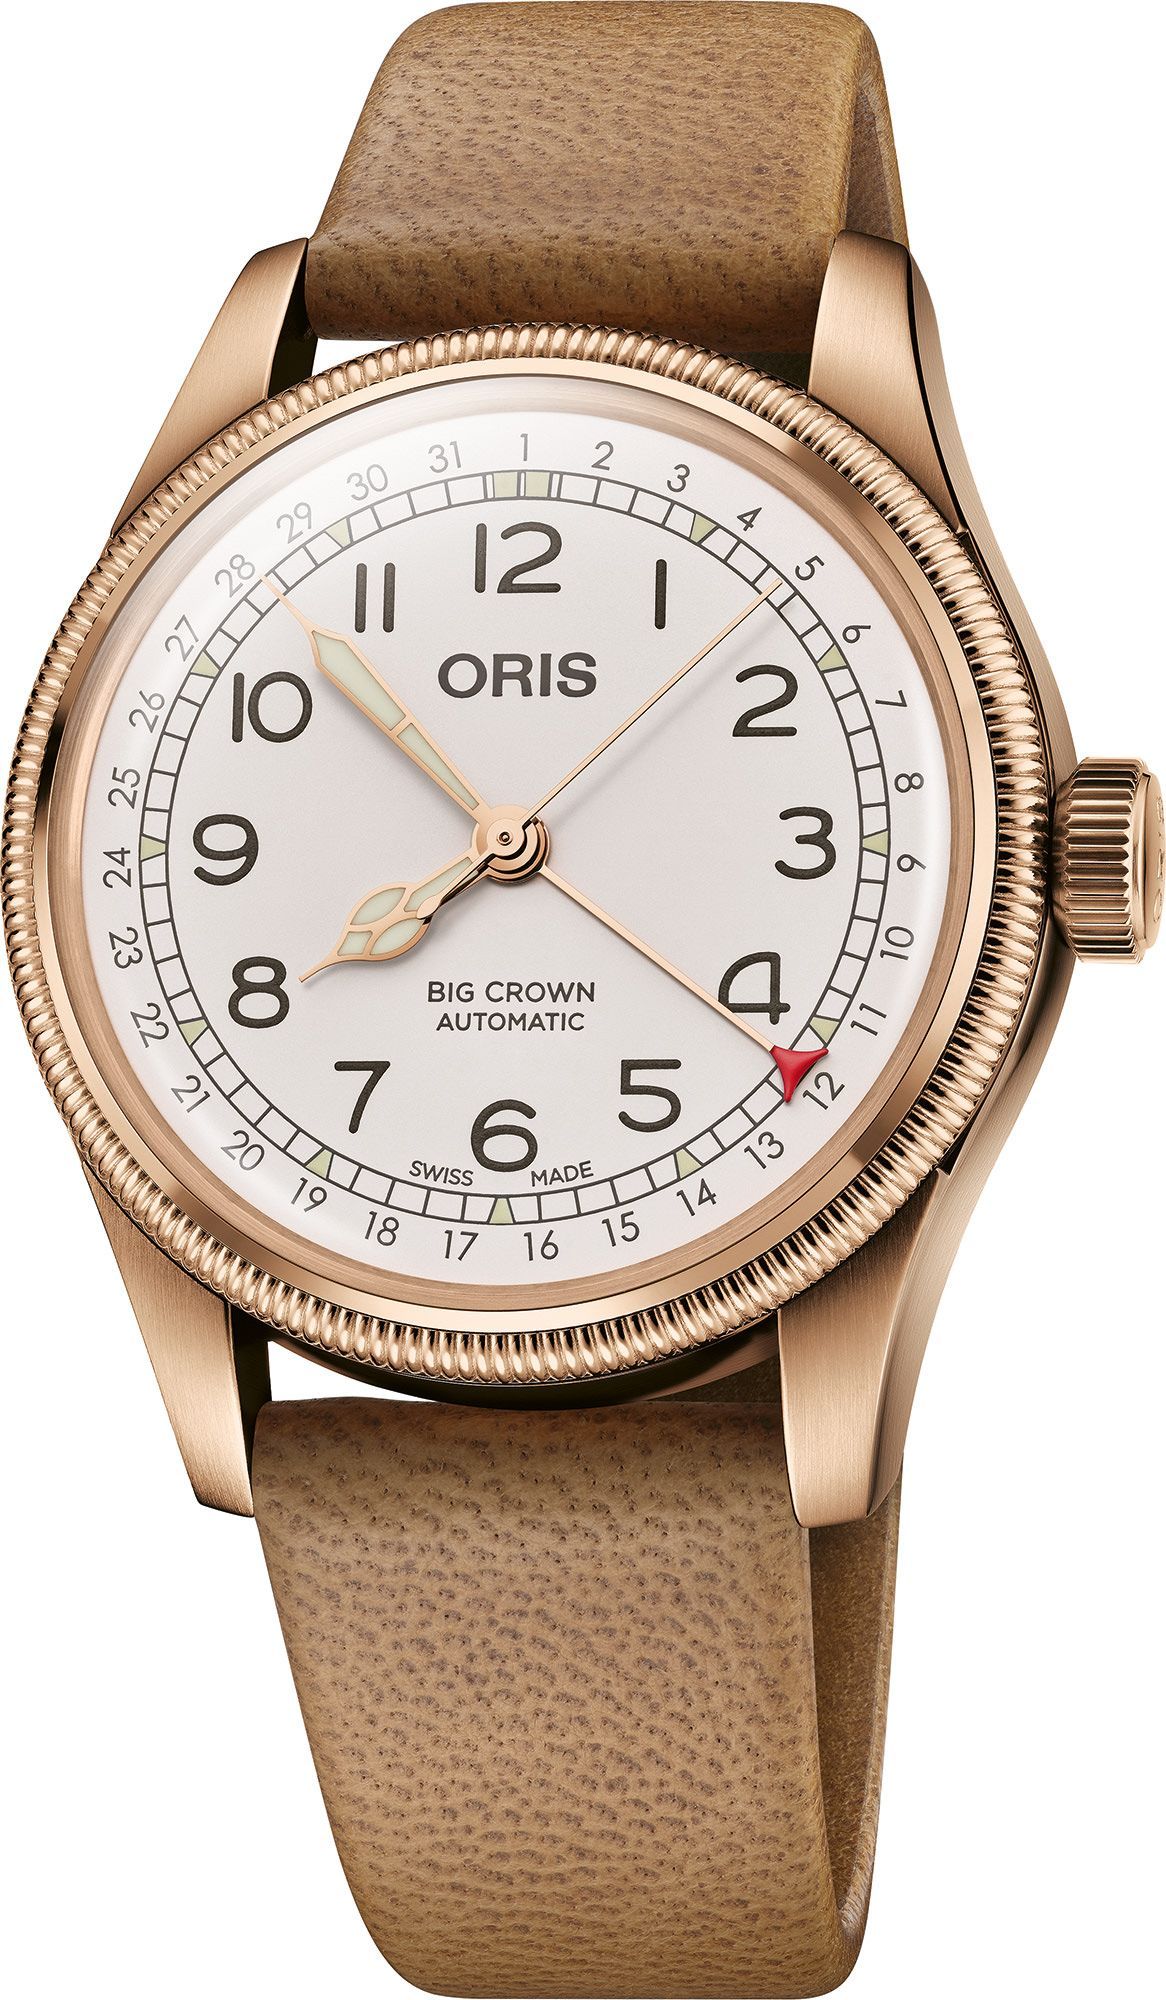 Oris Big Crown Father Time Limited Edition White Dial 40 mm Automatic Watch For Men - 1